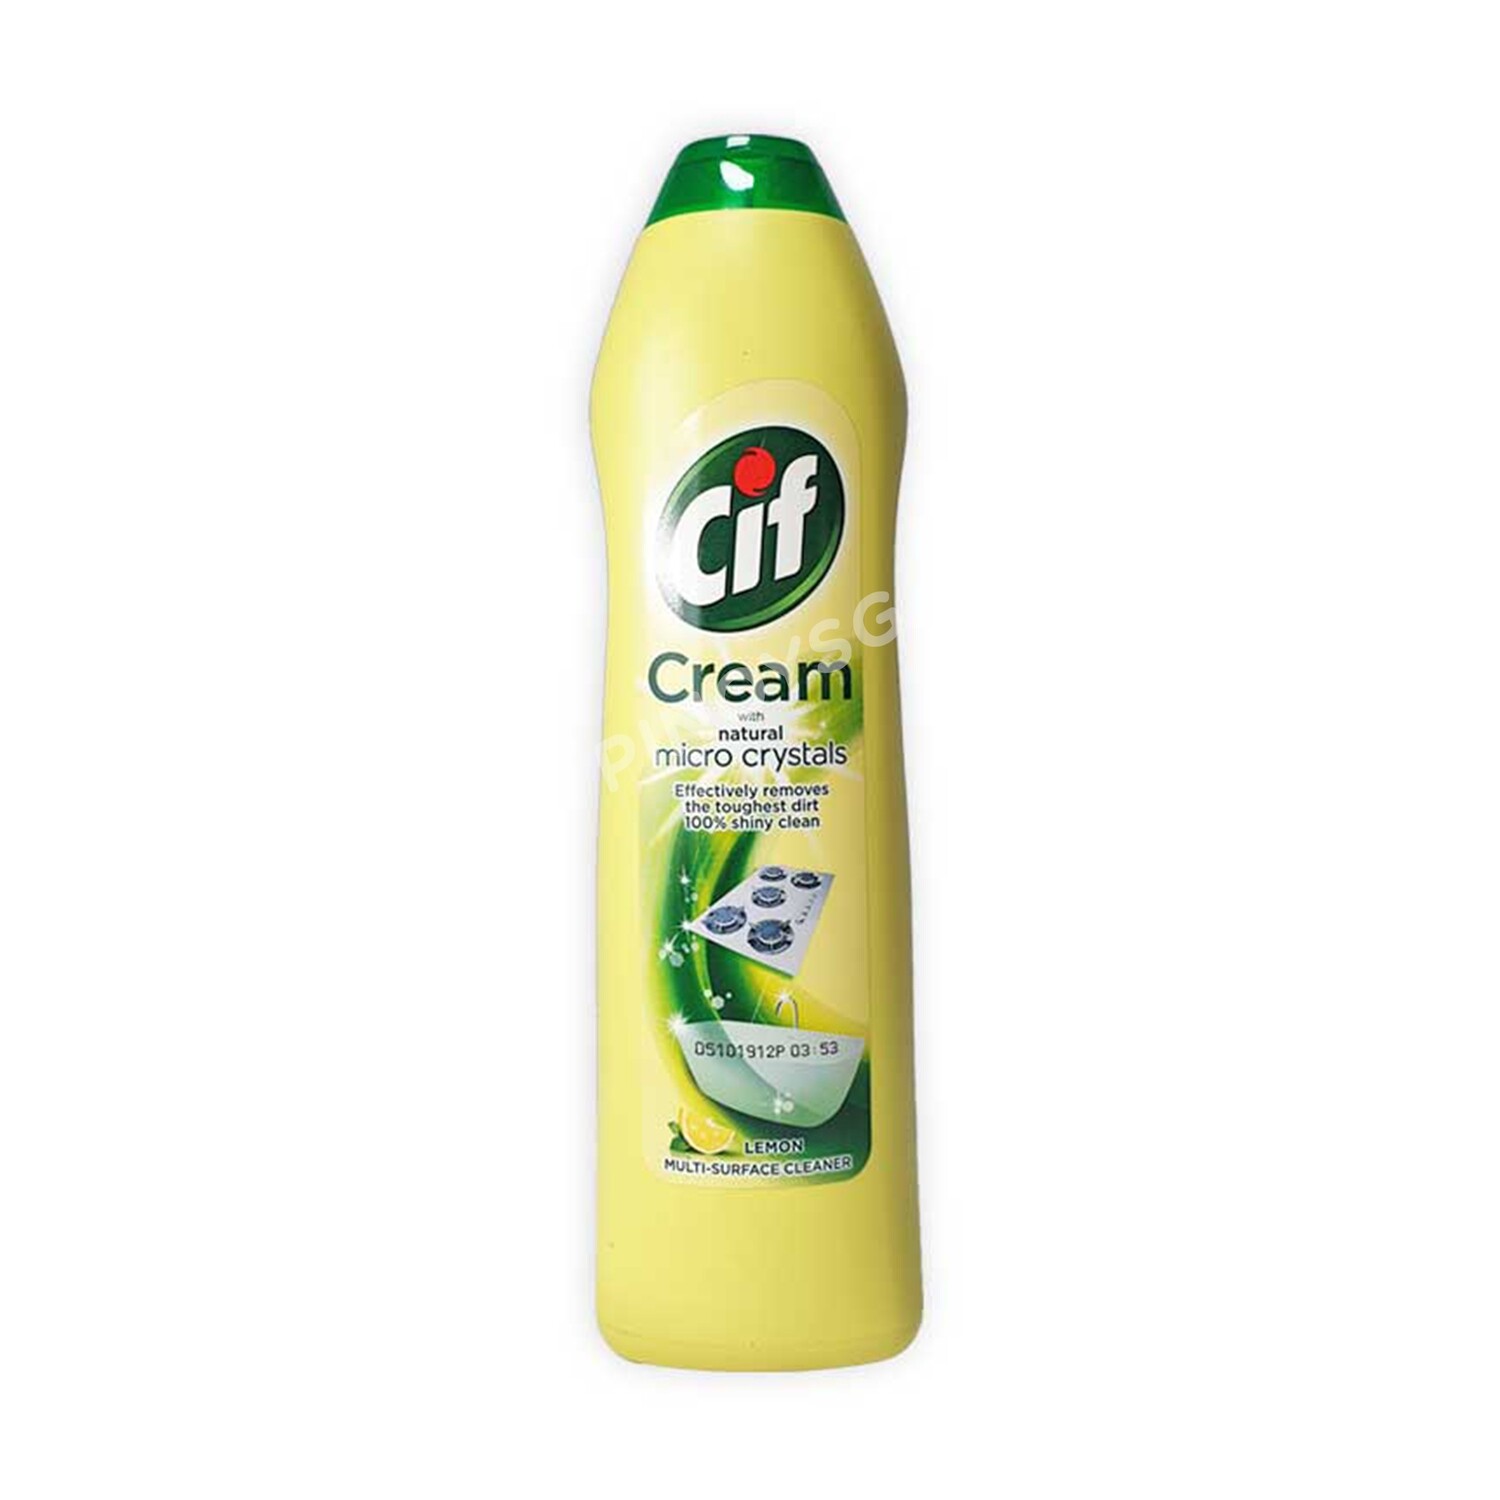 Cif Cream with Natural Micro Crystals Lemon Multi-Surface Cleaner 500ml